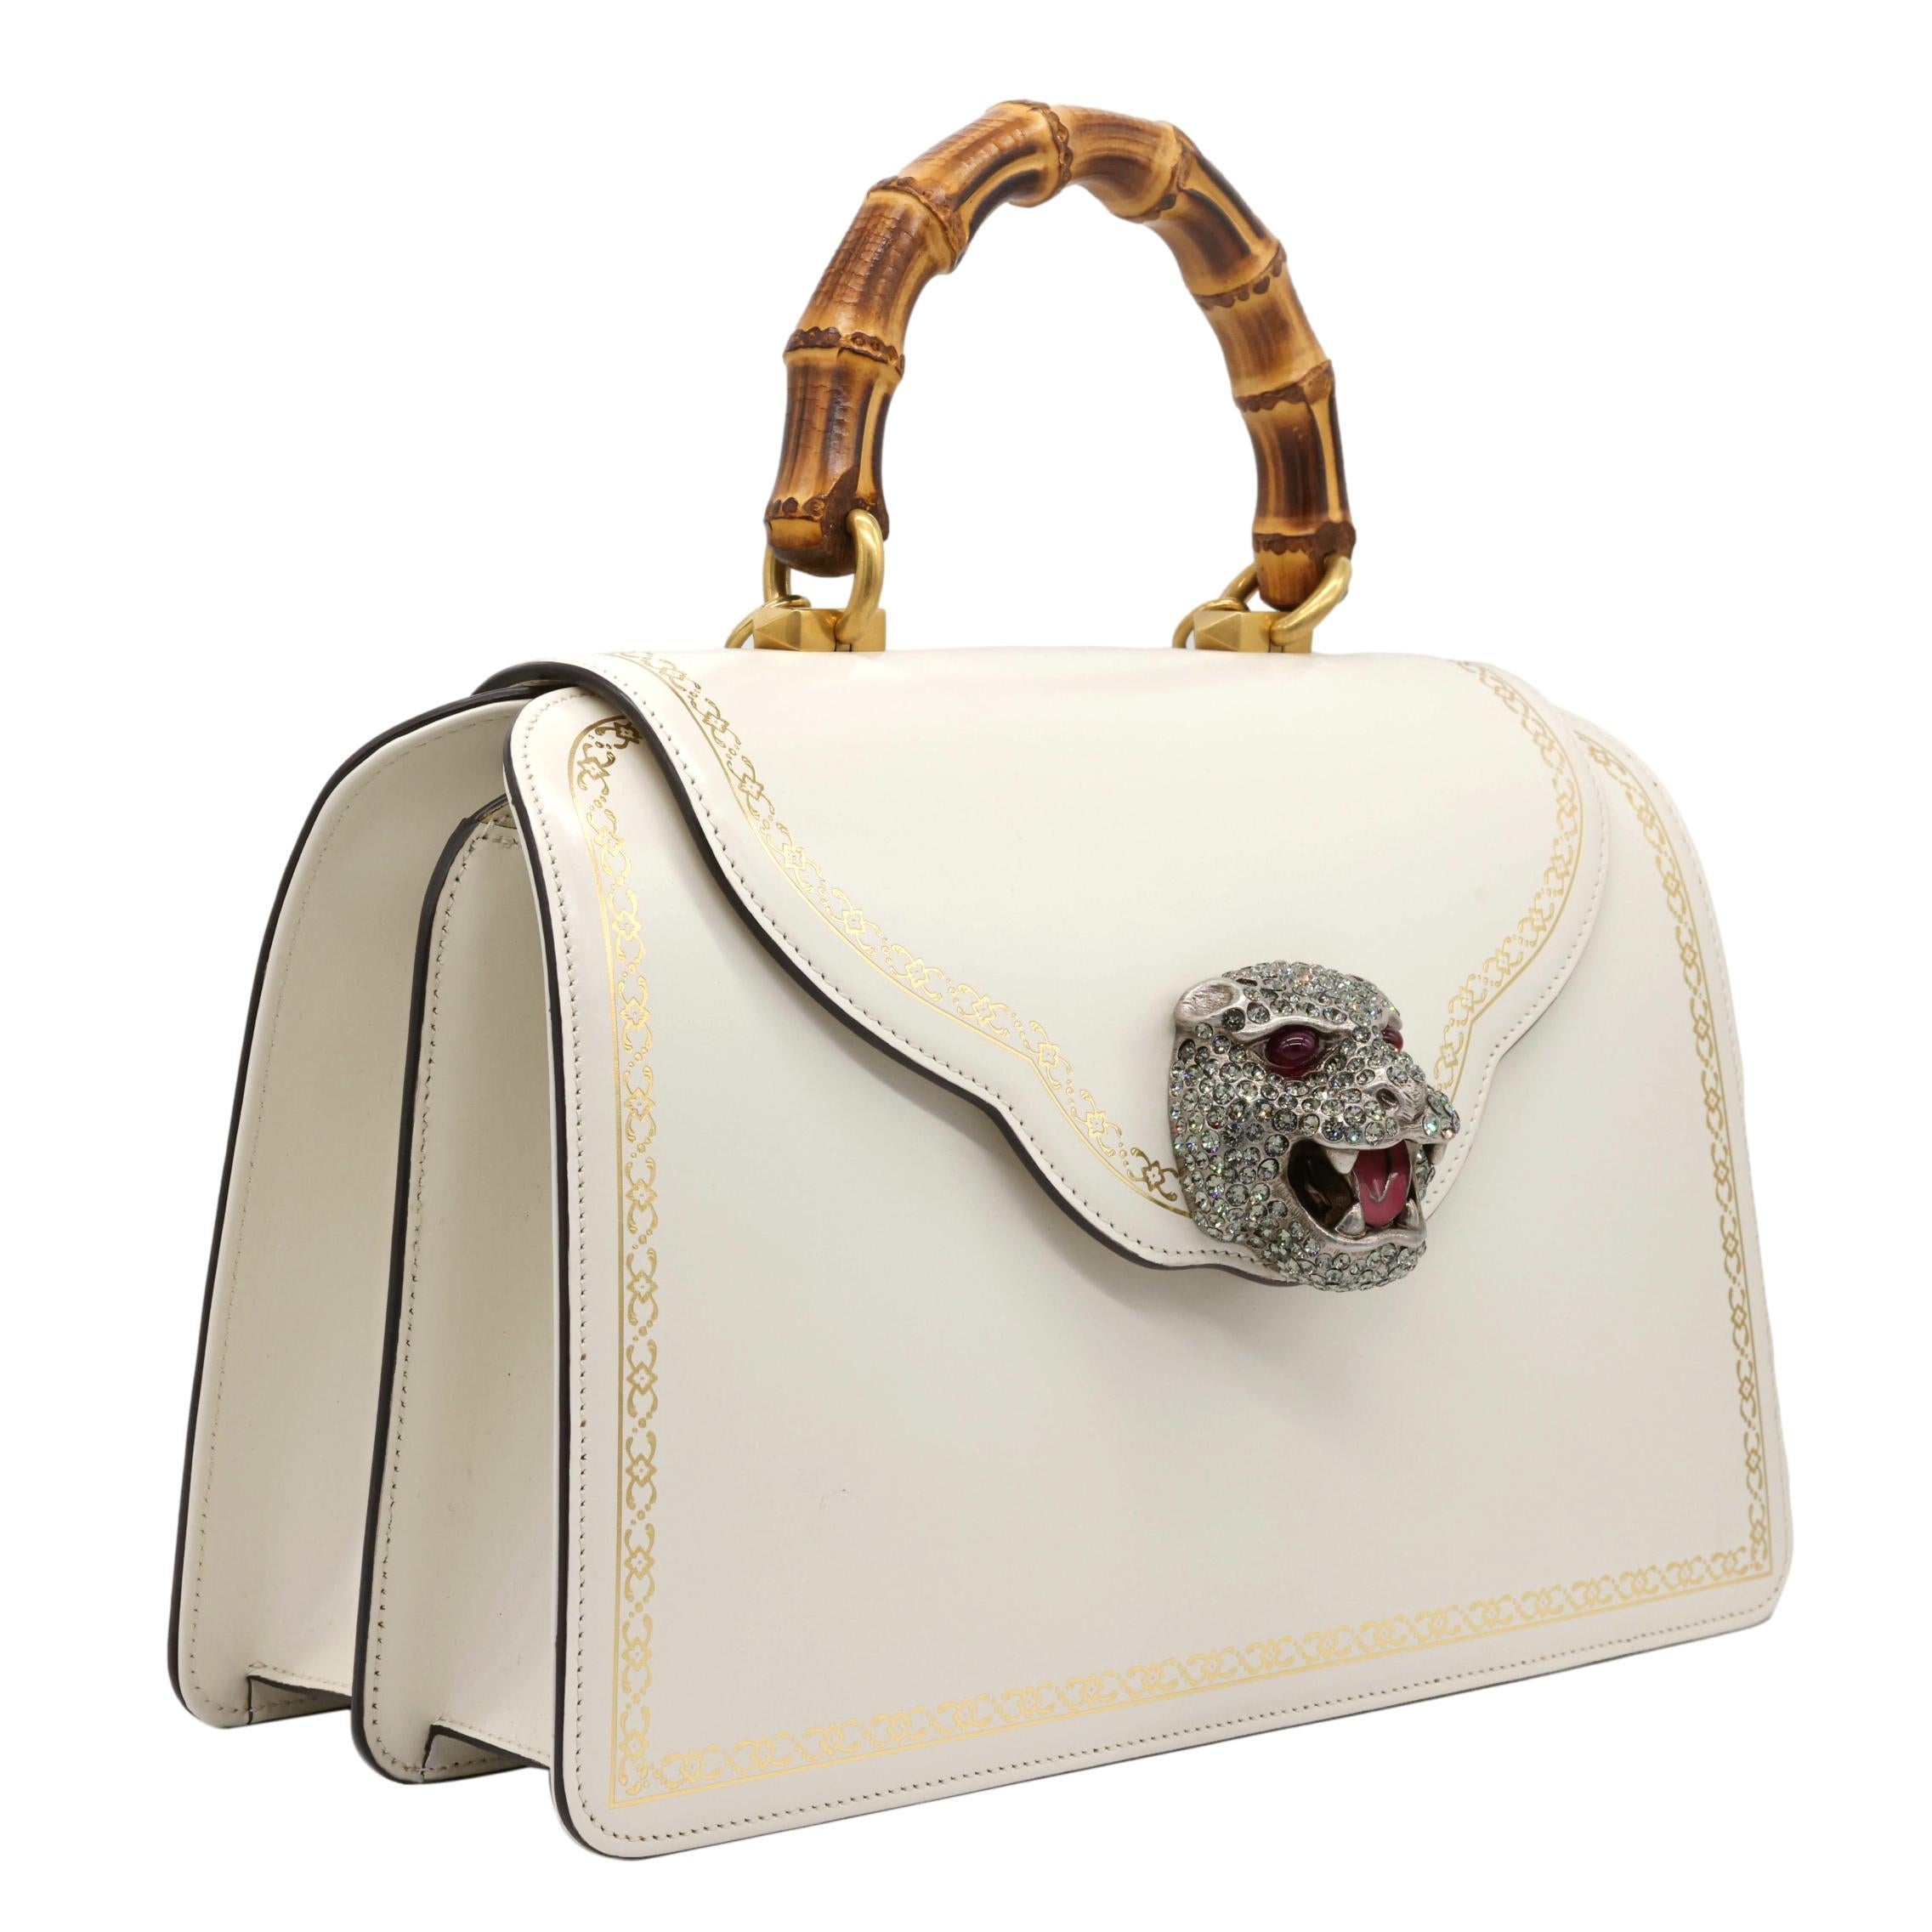 Gucci Thiara White Leather Bamboo Medium Top Handle Shoulder Bag, 2018. First introduced in the early 1940's, the Gucci bamboo bag came into production as materials around Europe became scarce. Bamboo, which could still be abundantly sourced from